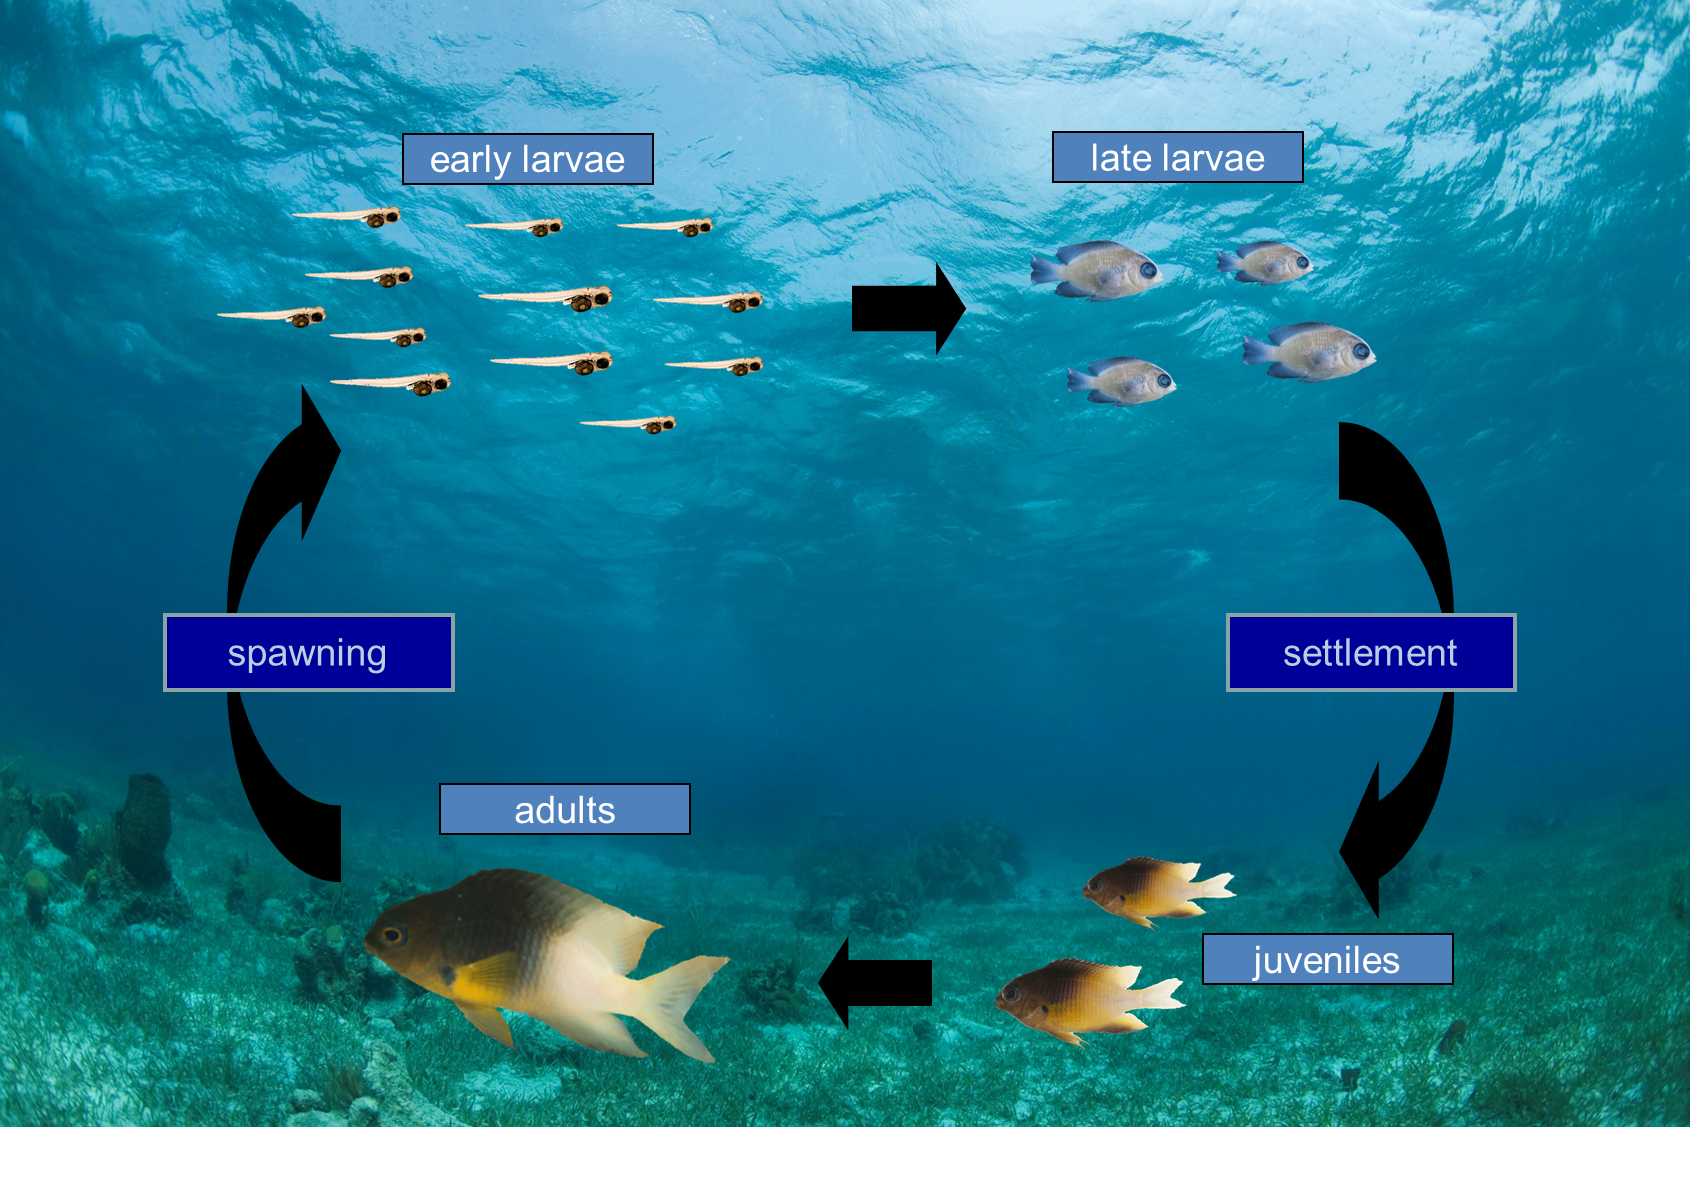 Fig. 1 caption:  Life cycle of the bicolor damselfish, showing that understanding how the population changes depends on simultaneously studying the juvenile and adult fish on the coral reef as well as the larvae that disperse back to the same reef or between reefs in a metapopulation.  Illustration credit:  Darren Johnson.